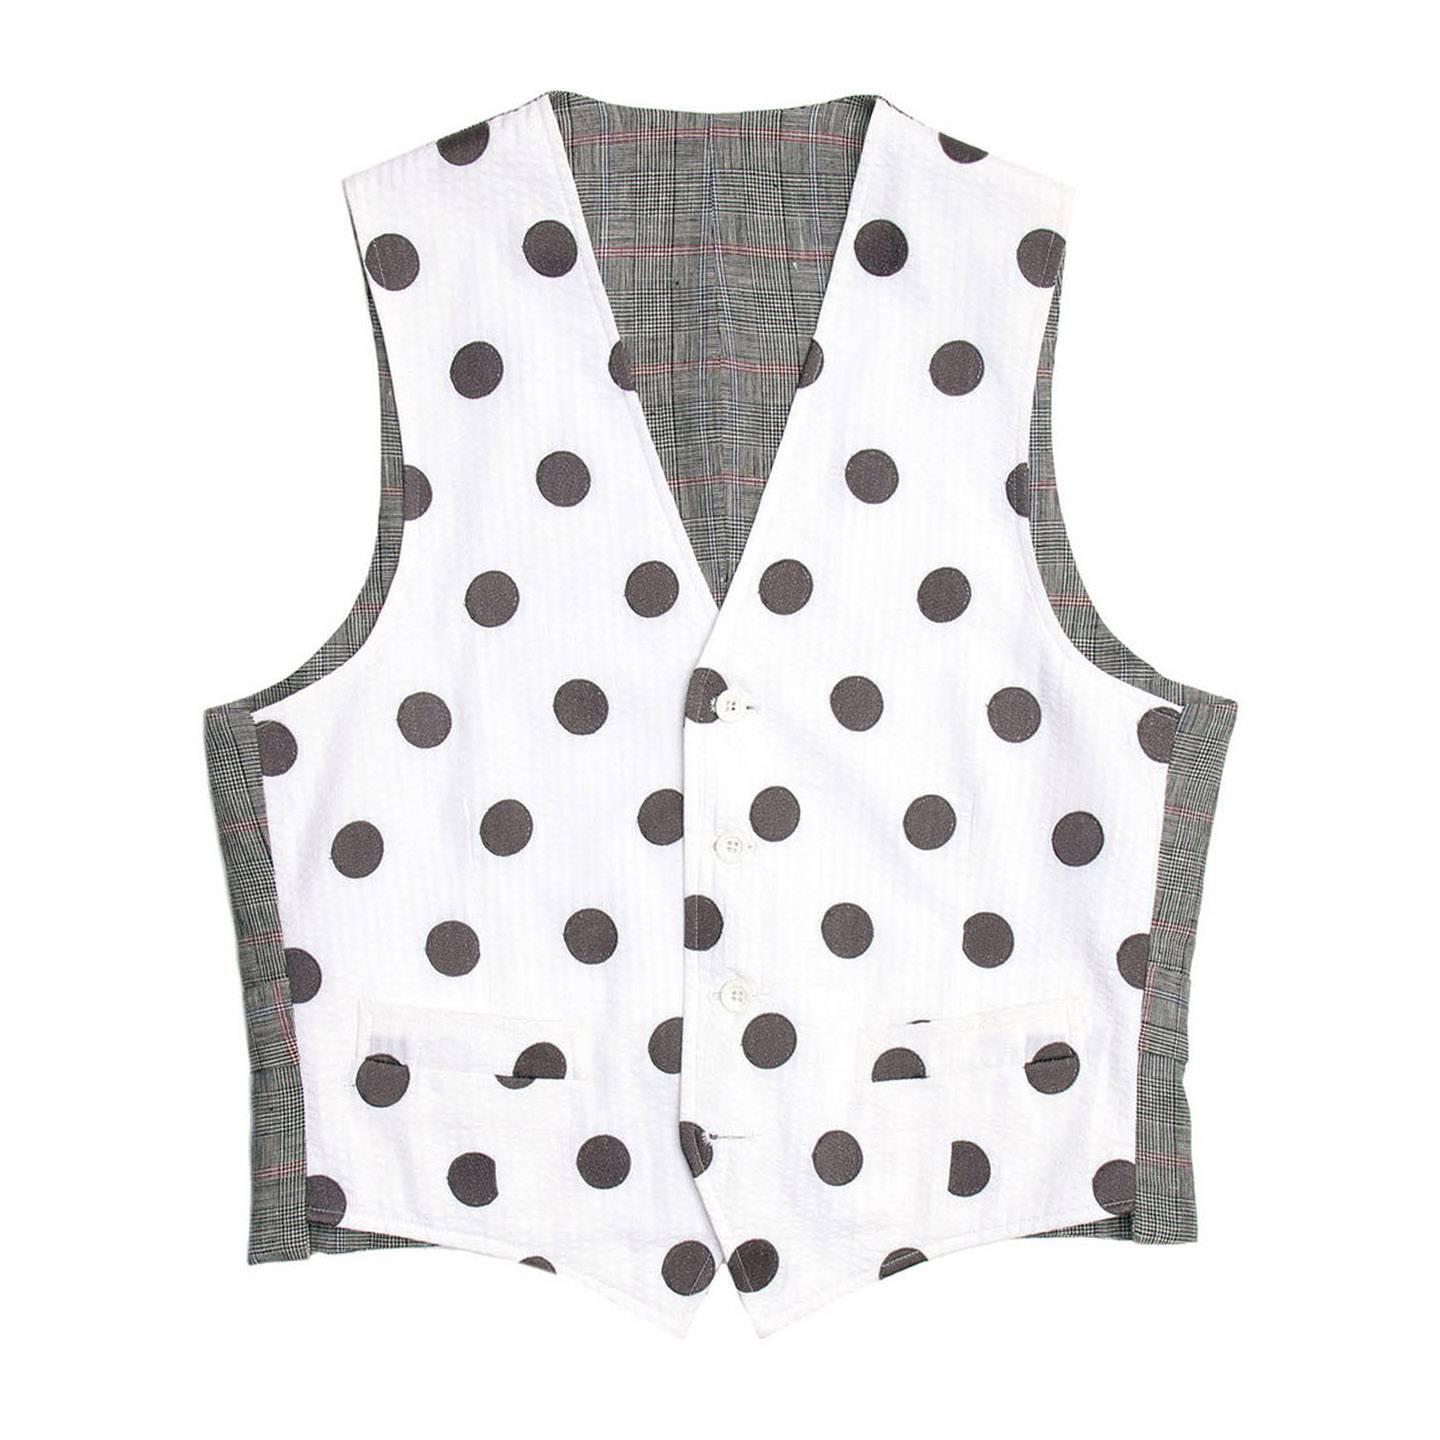 Seersucker vest with white cotton and wide grey polka dots front. The back of the vest is grey, white, blue and red tartan with a thin buckle back that fastens with two white rubber buttons to match the ones at front.

Size  1

Condition 